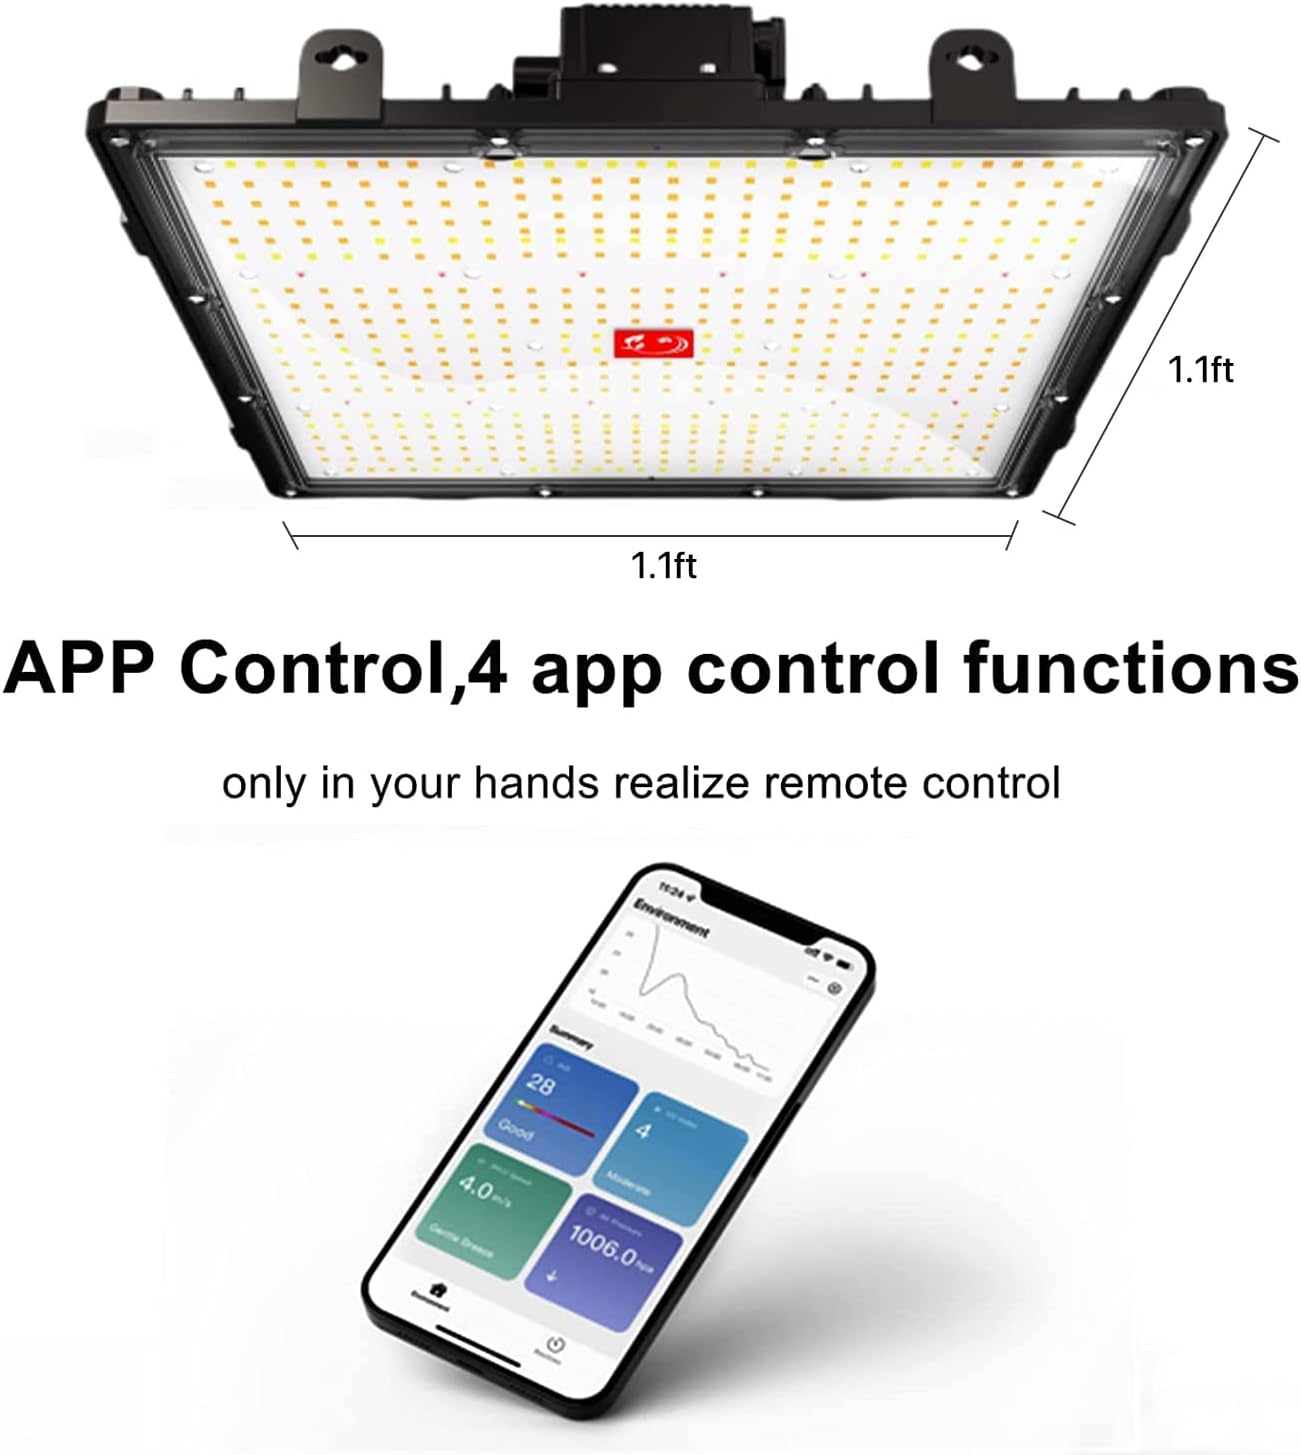 HYPERLITE Groplanner LED Grow Light GP1500 App Dimmable, 756pcs LEDs 3x3ft Growing lamp,Full Spectrum 150w Growing Lamps Board Daisy Chain for Indoor Plants Seeding Veg,Greenhouses Grow Tent.